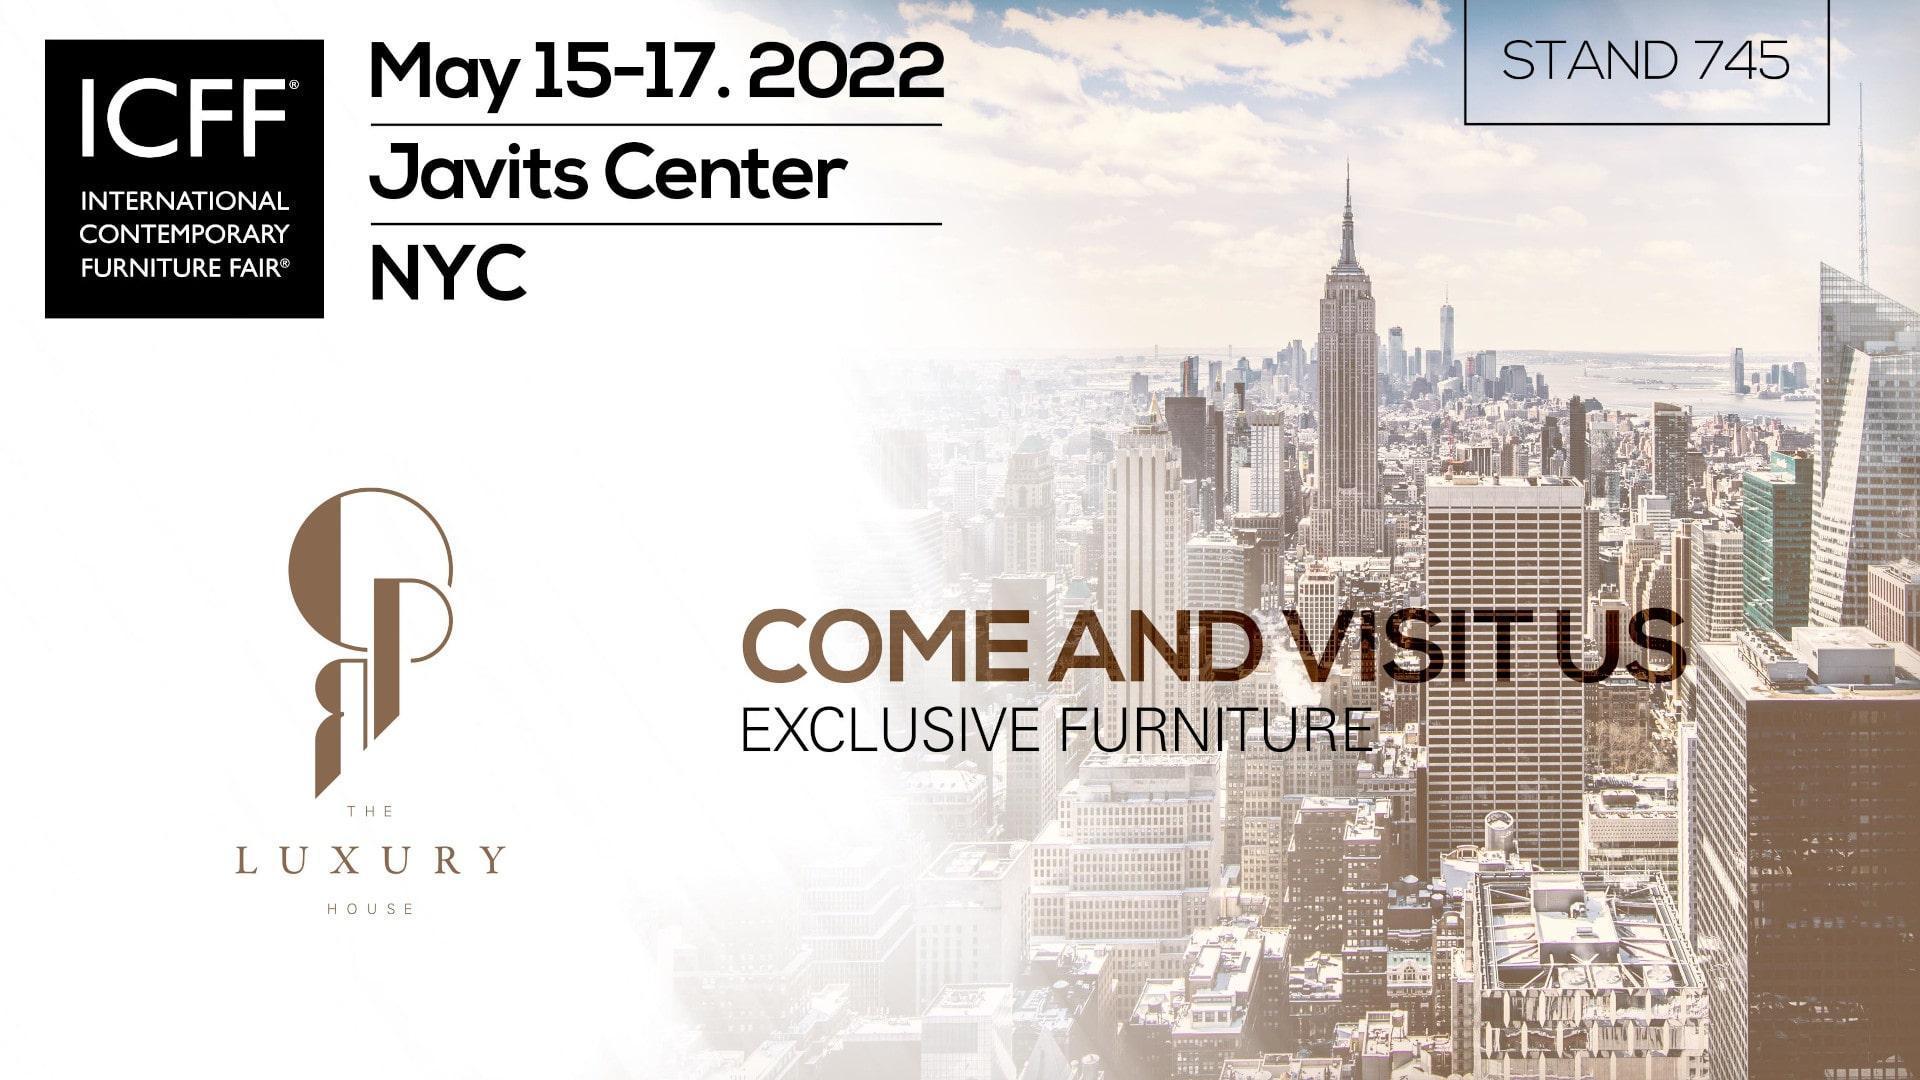 ICFF 2022, High End Furniture Trade Show in New York City